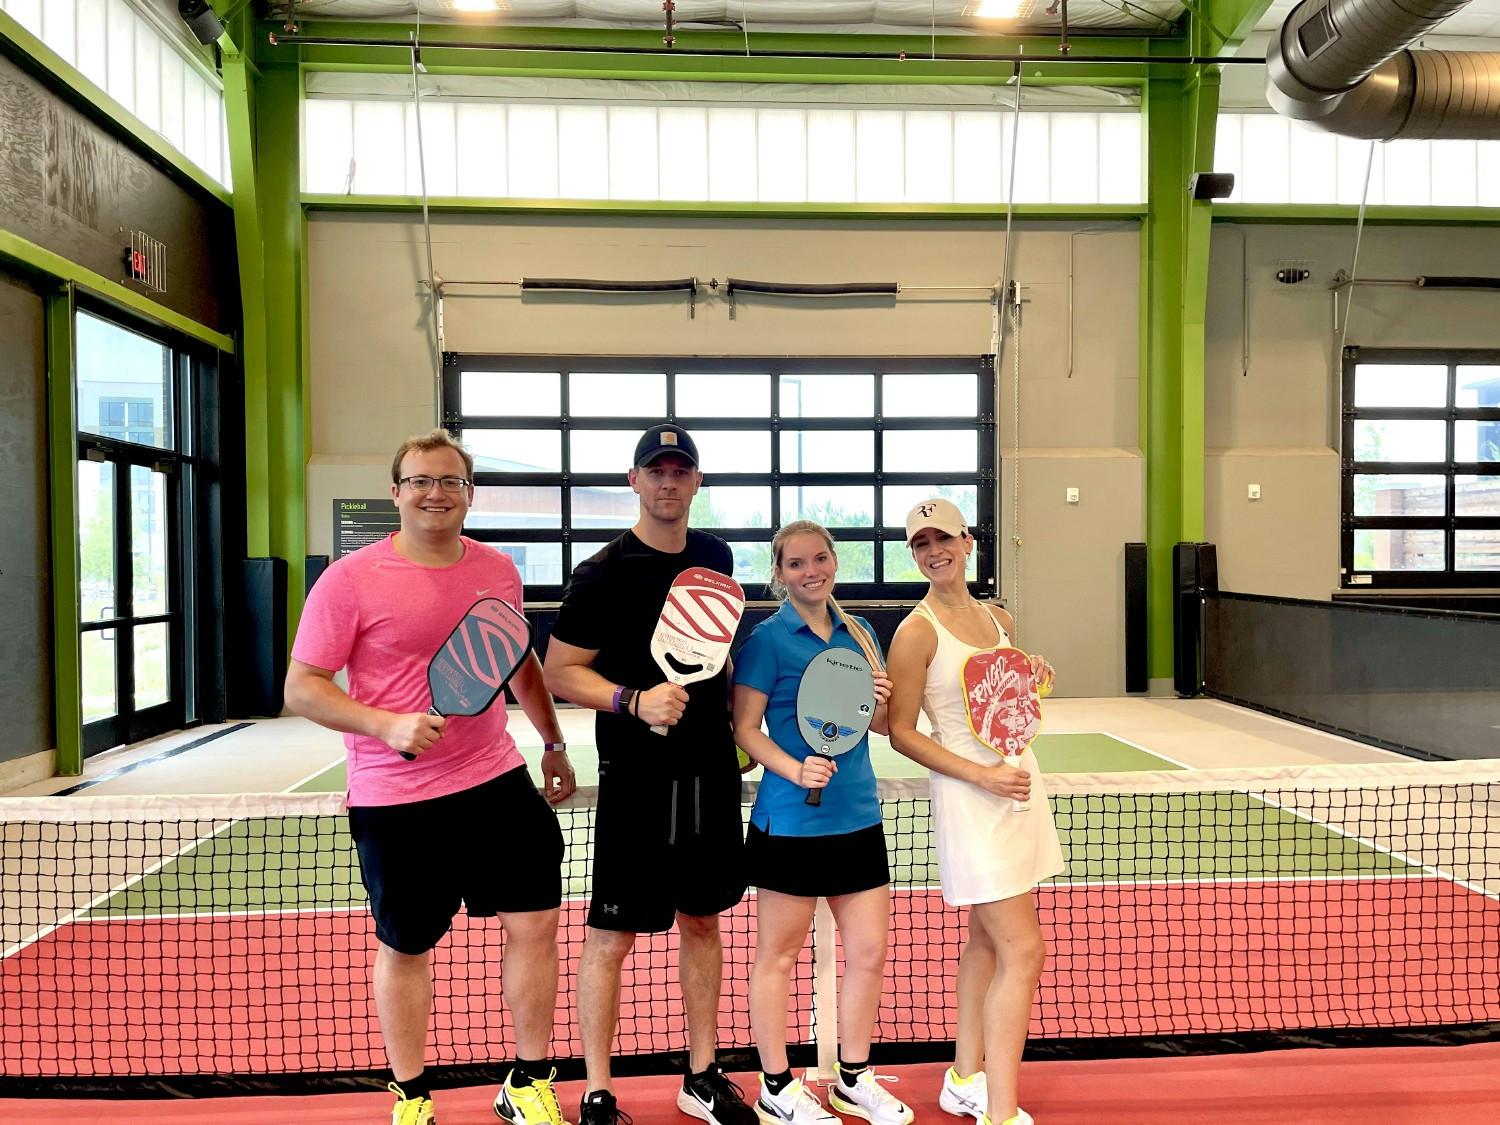 M2G team members competing in pickleball tournament to benefit the company's 501c3.